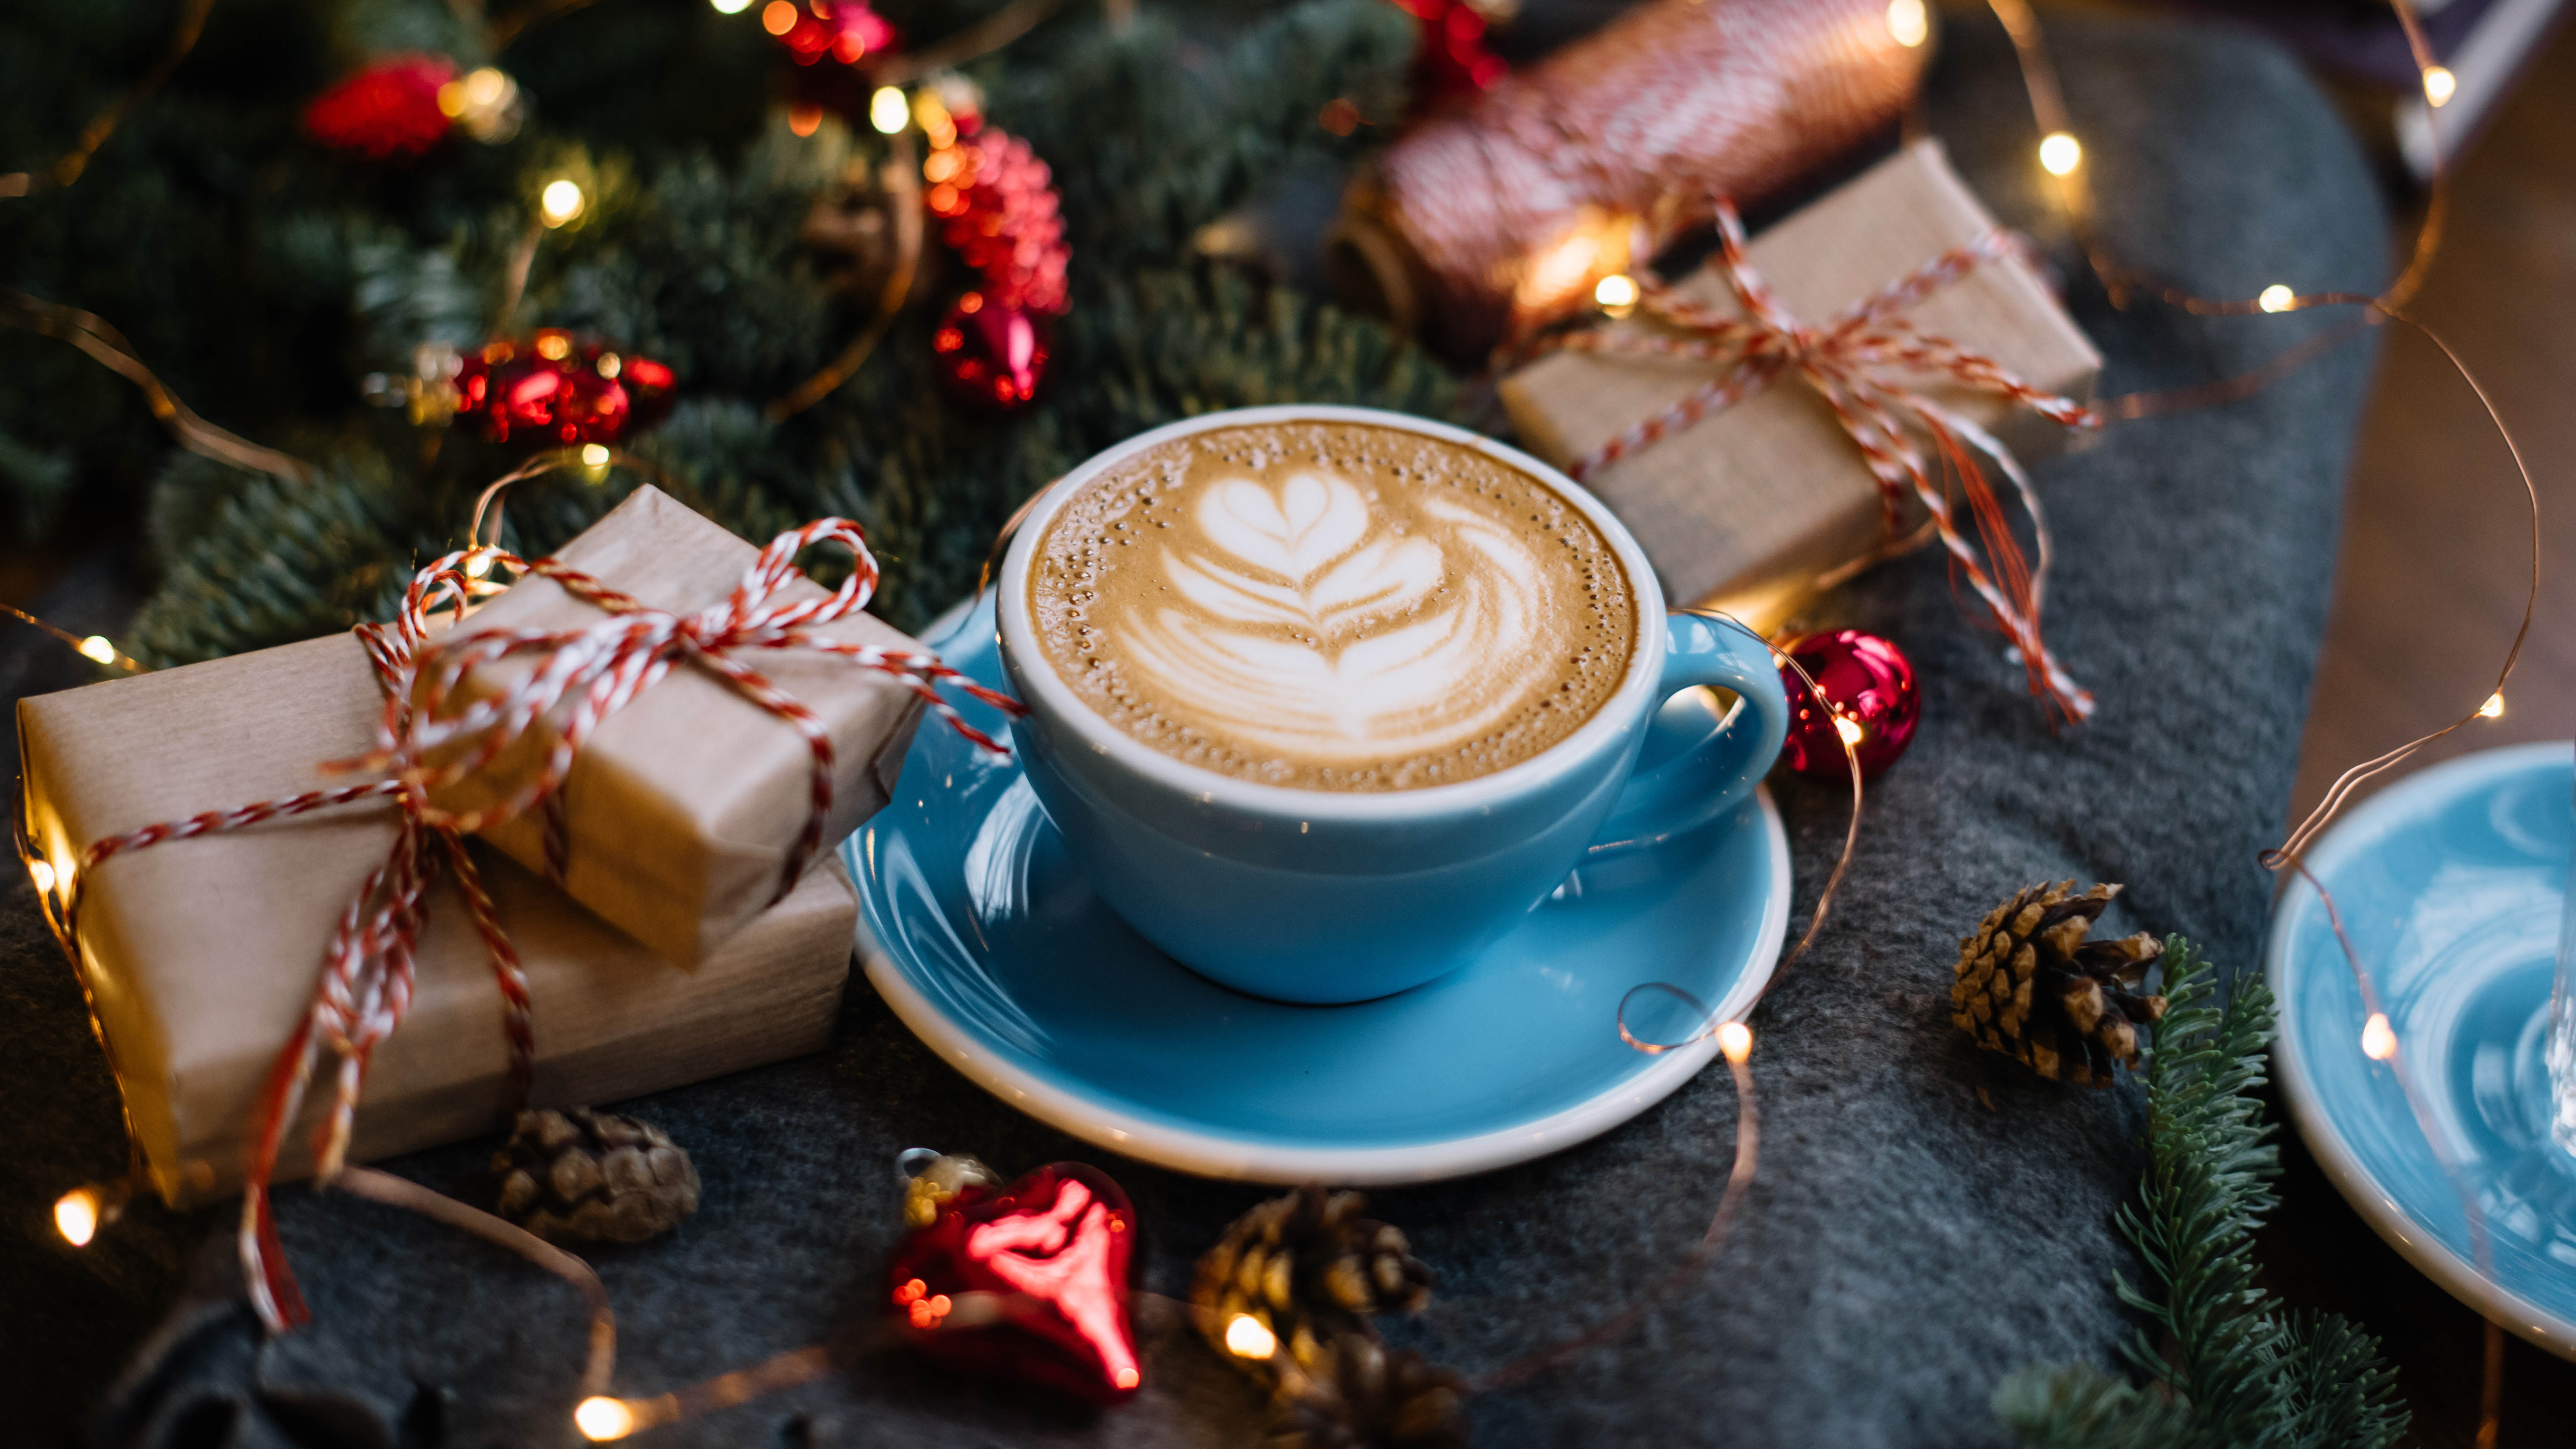 The best gifts for coffee lovers in 2023